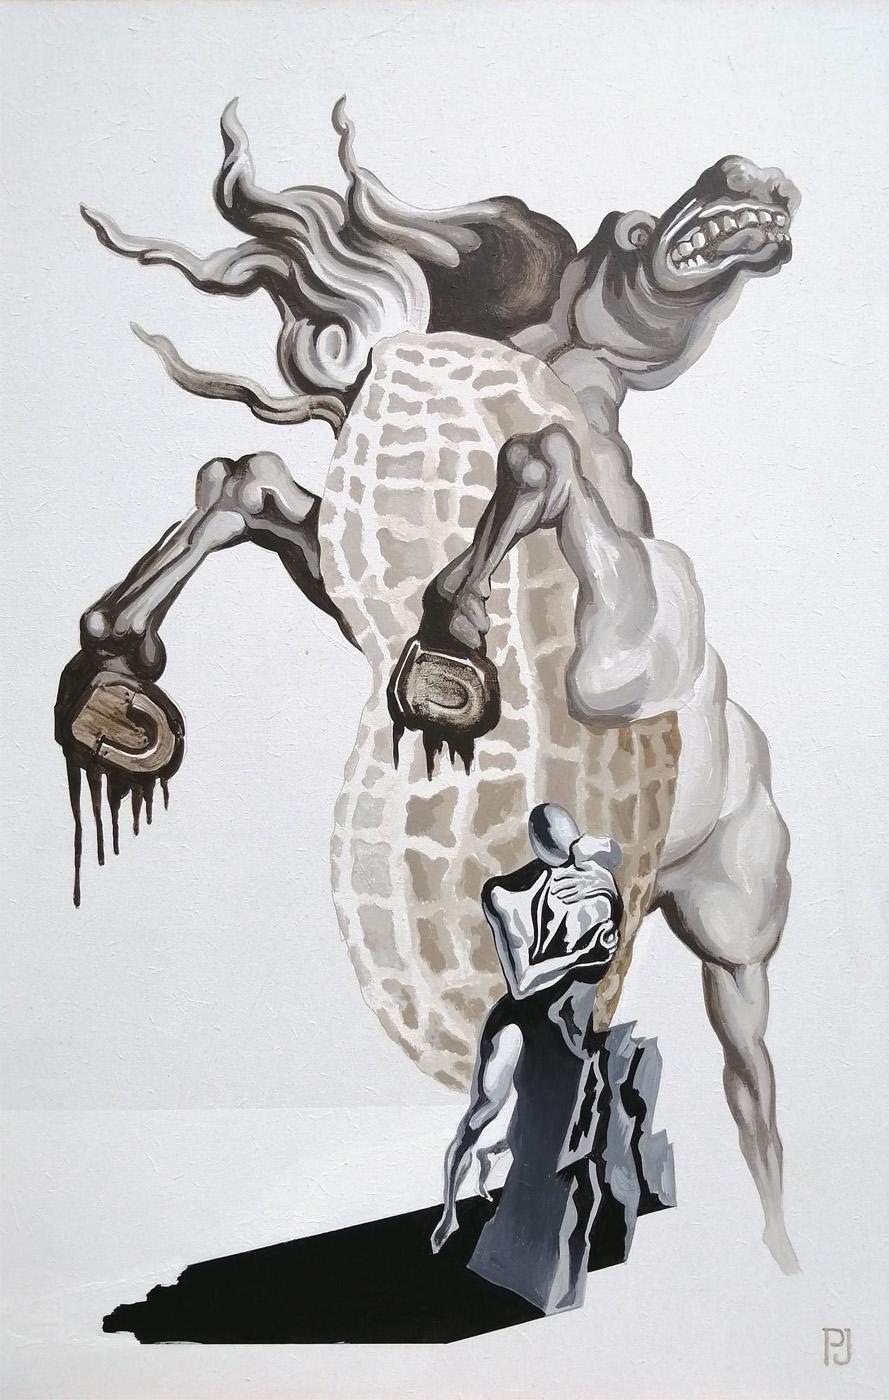 Pierre Jacob - Peanut and love

Technical Description: Acrylic paint on wood support, thickness = 6mm 

Dimensions : 60 x 40 cm 

This image is an evocation of the erotic world of Dali. Giant peanut, furious horse, and a couple in love. These motifs